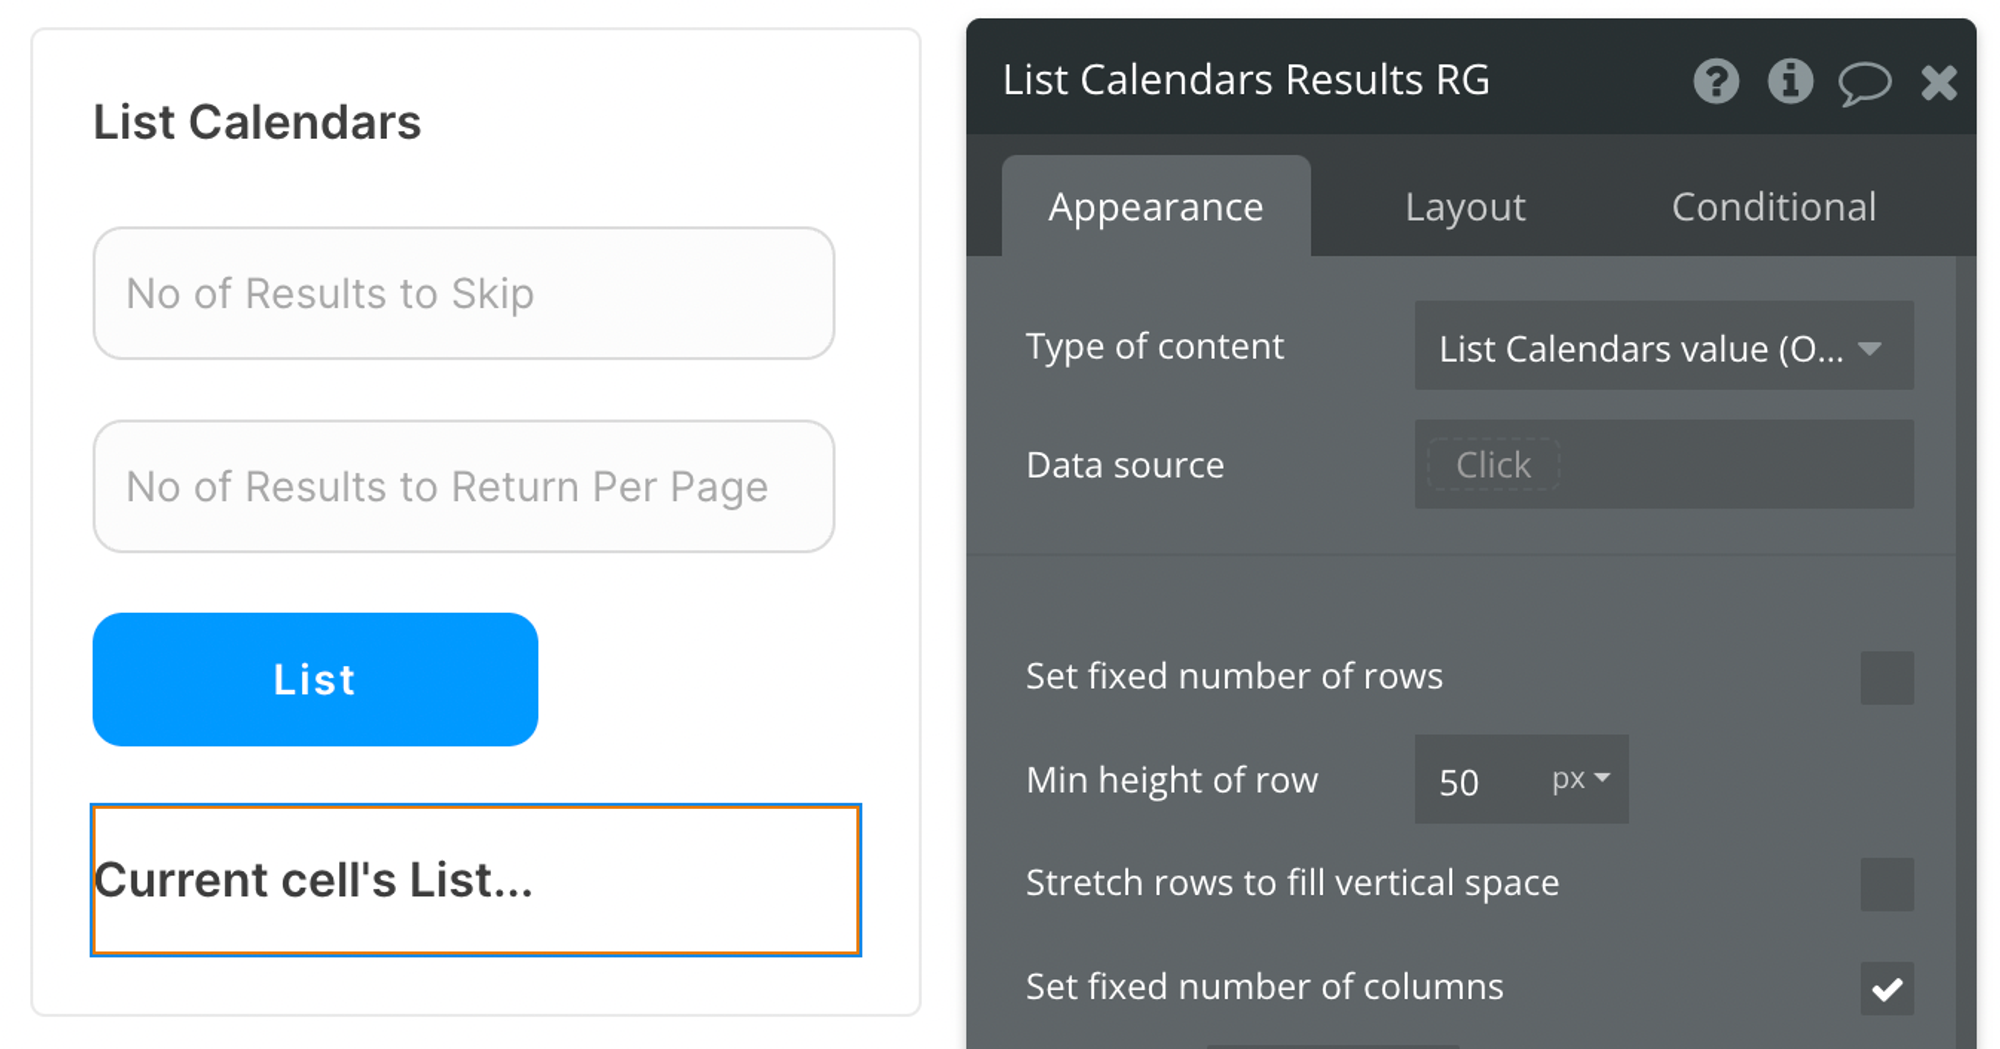 Select List Calendars value (Outlook) from the list of content types